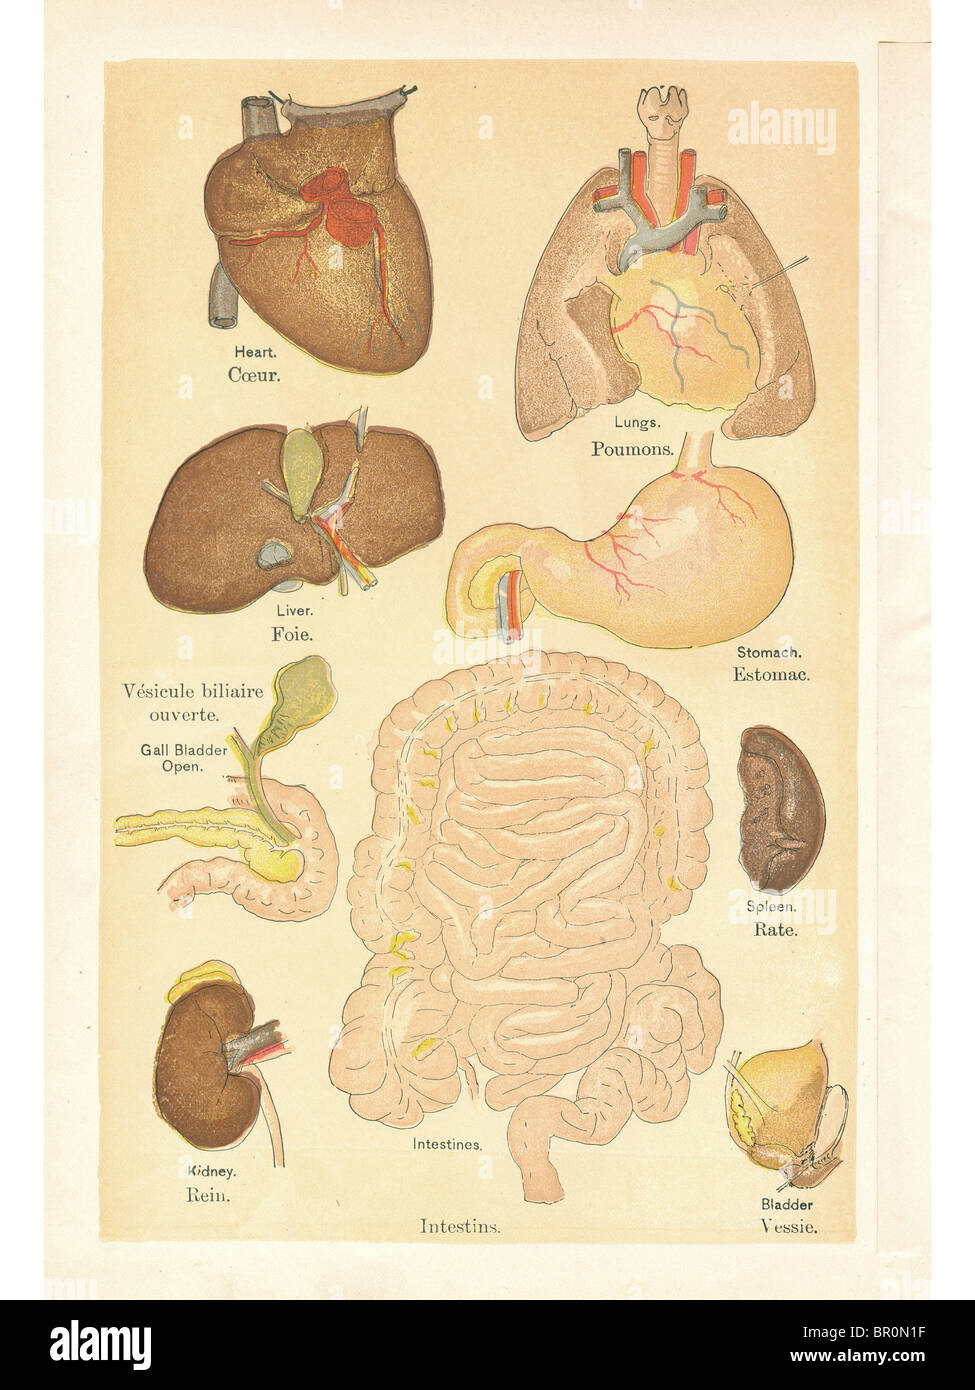 Medical illustrations of organs from a vintage book Stock Photo